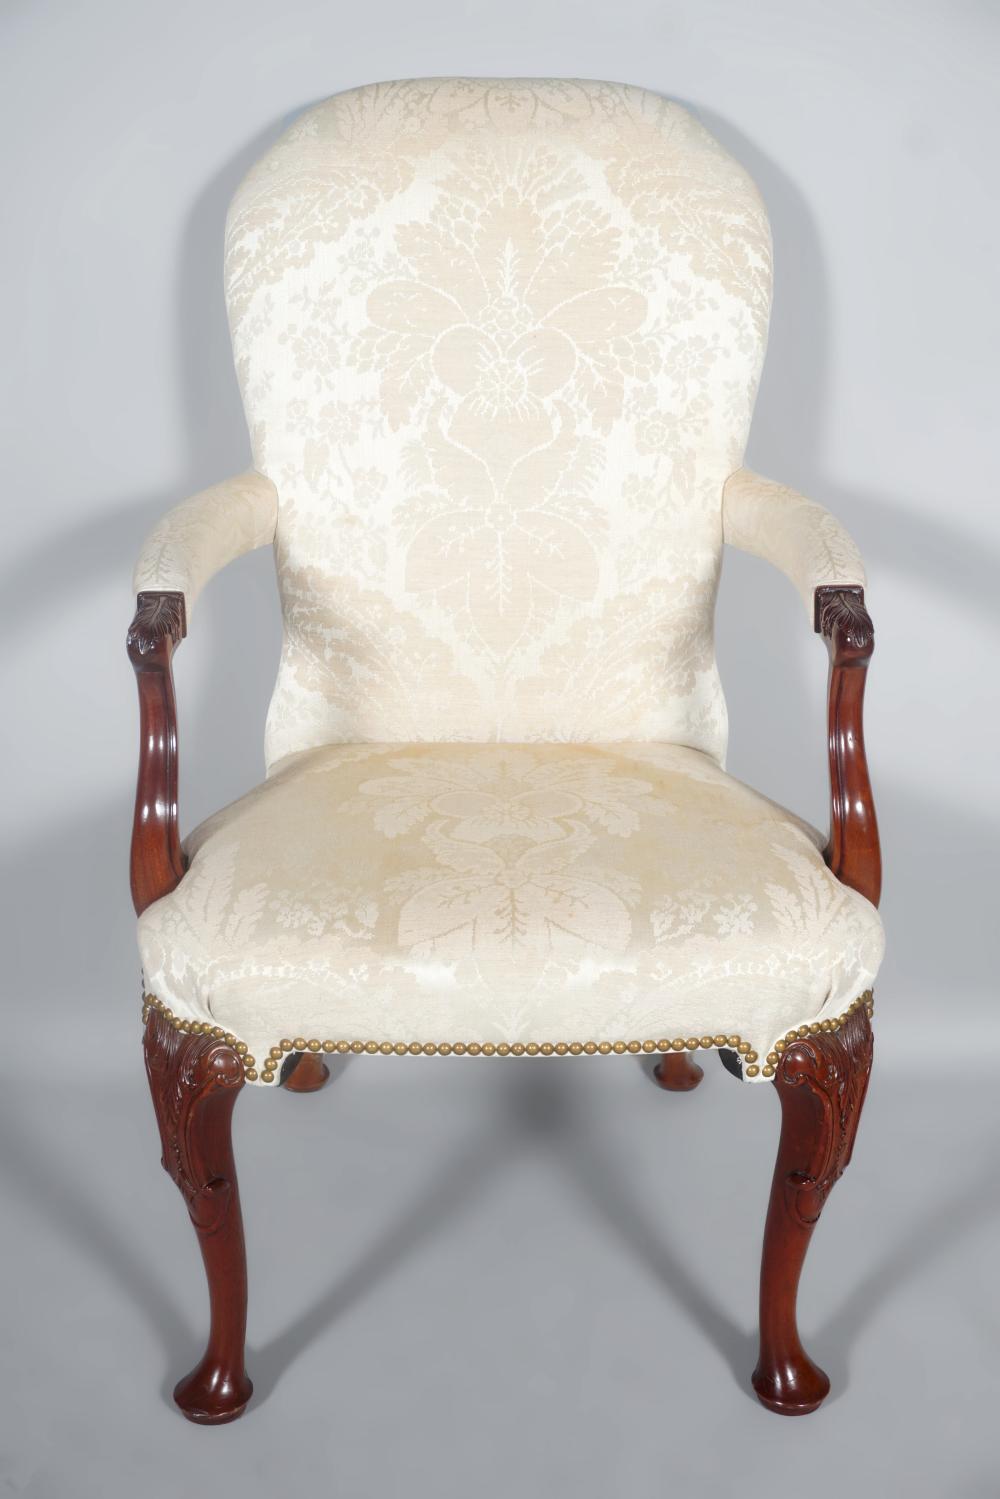 PAIR OF GEORGIAN STYLE UPHOLSTERED